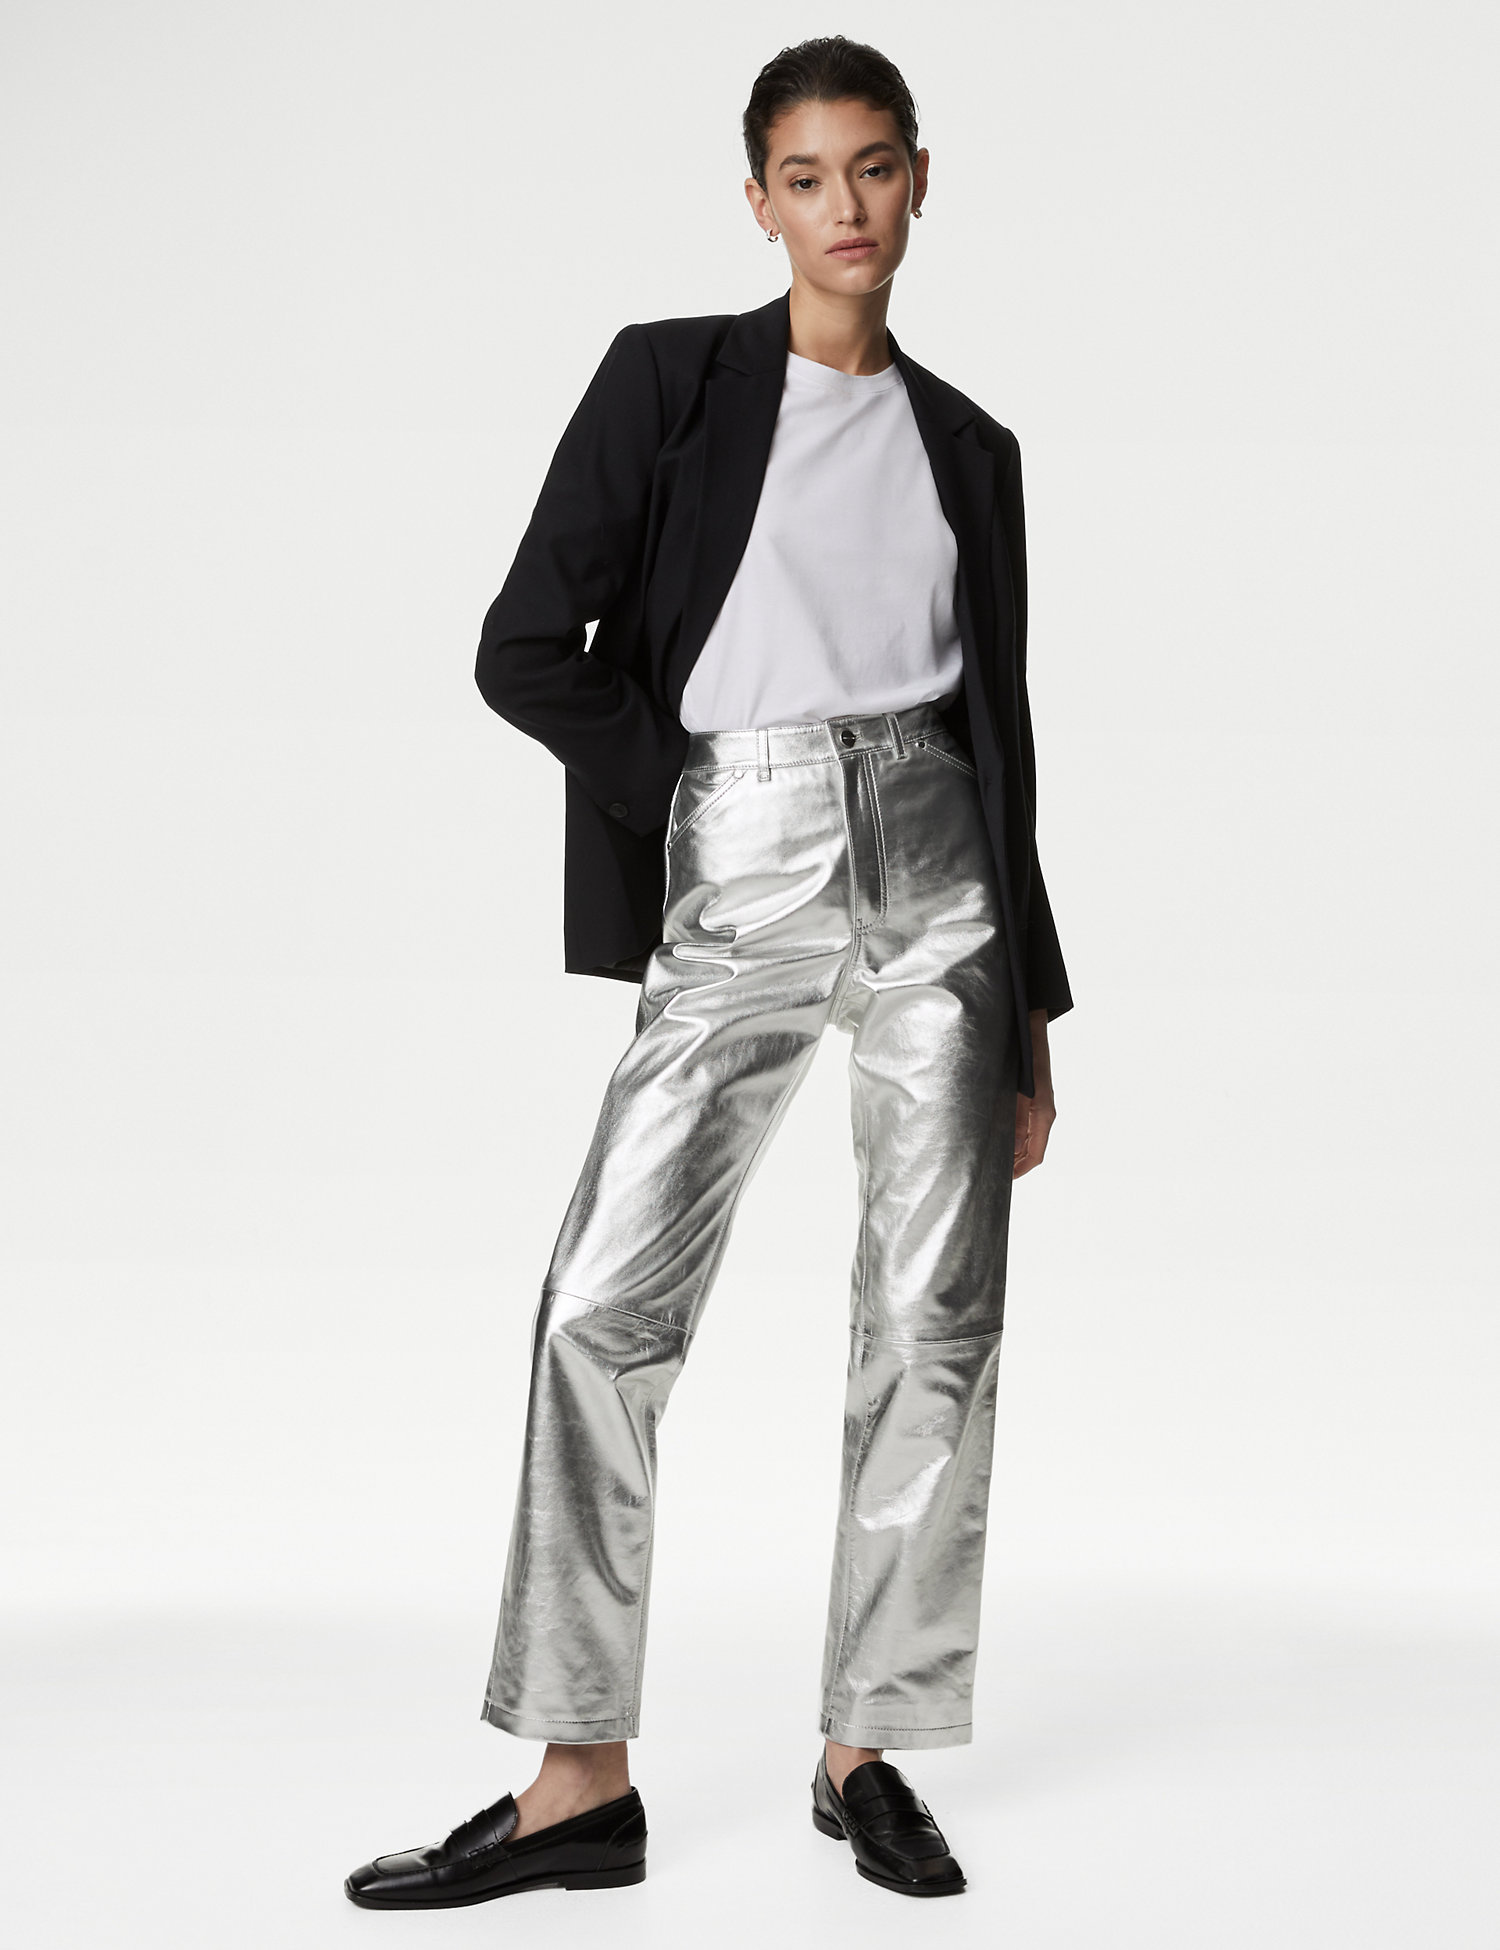 M&S’s Leather Trousers Are Legendary—Now, They’re Back for Winter